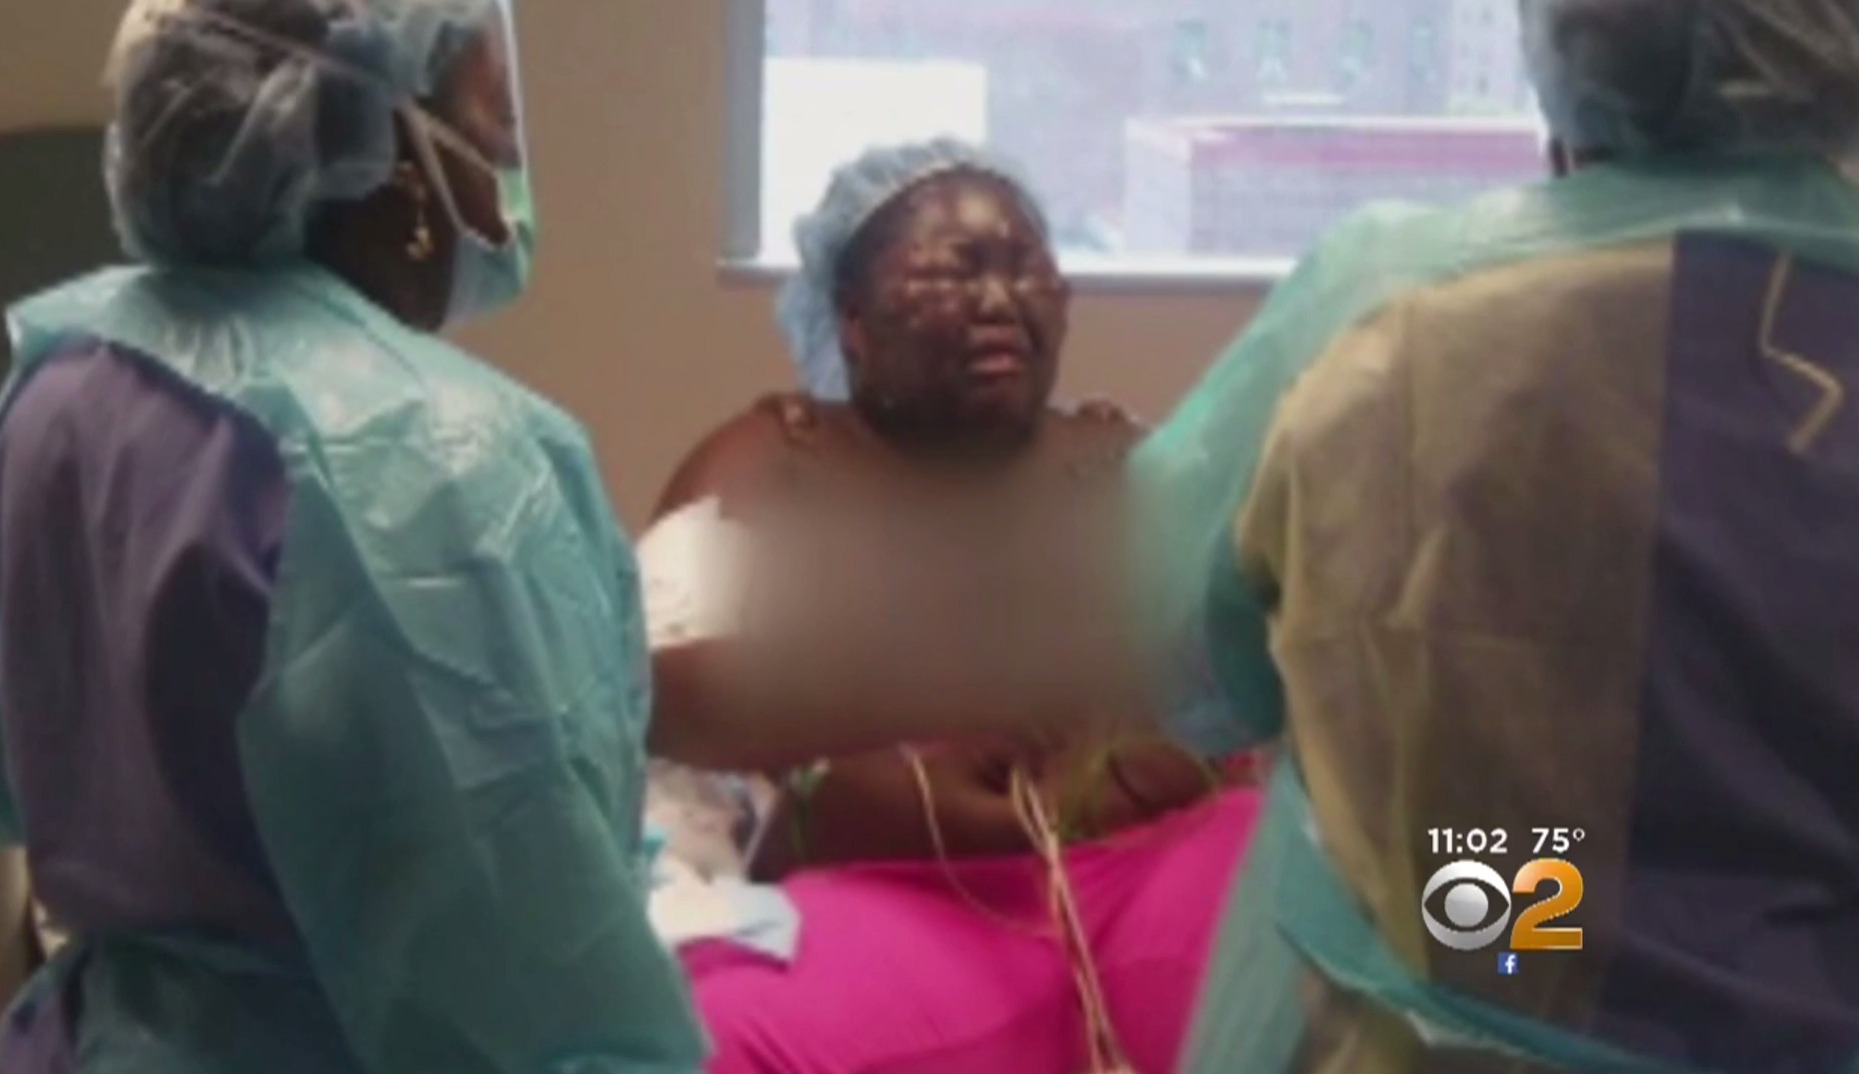 Girls Face Severely Burned When Another Girl Pours Boiling Water On Her Cbs News 6208